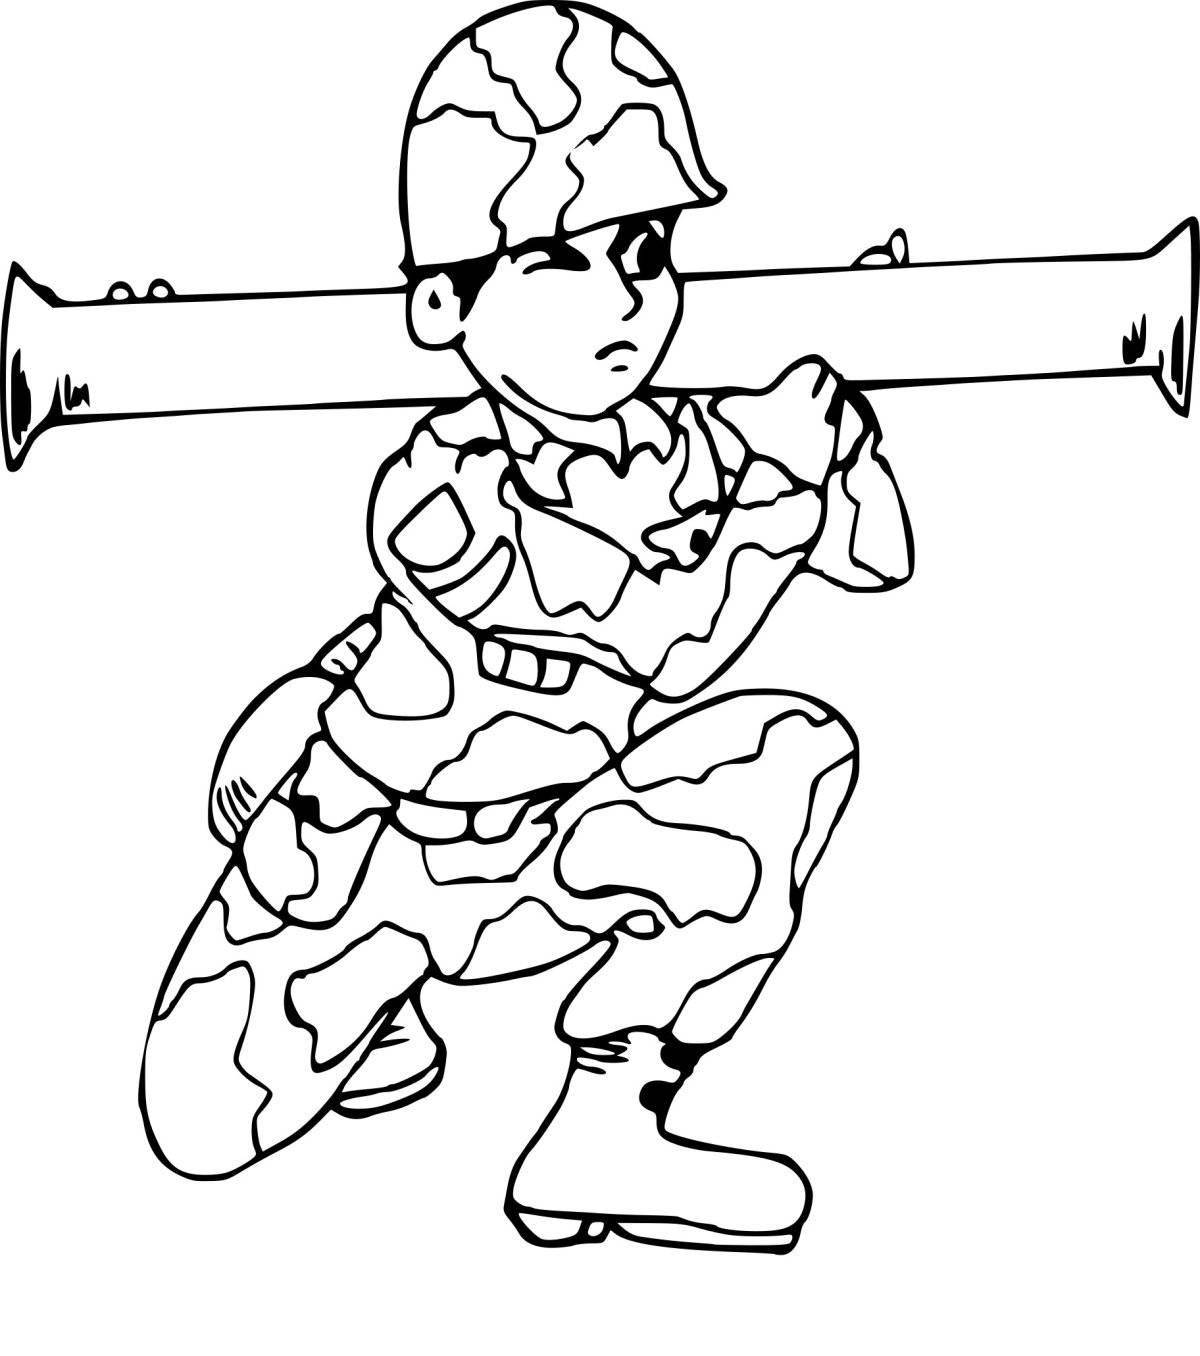 Coloring book nice military profession for schoolchildren